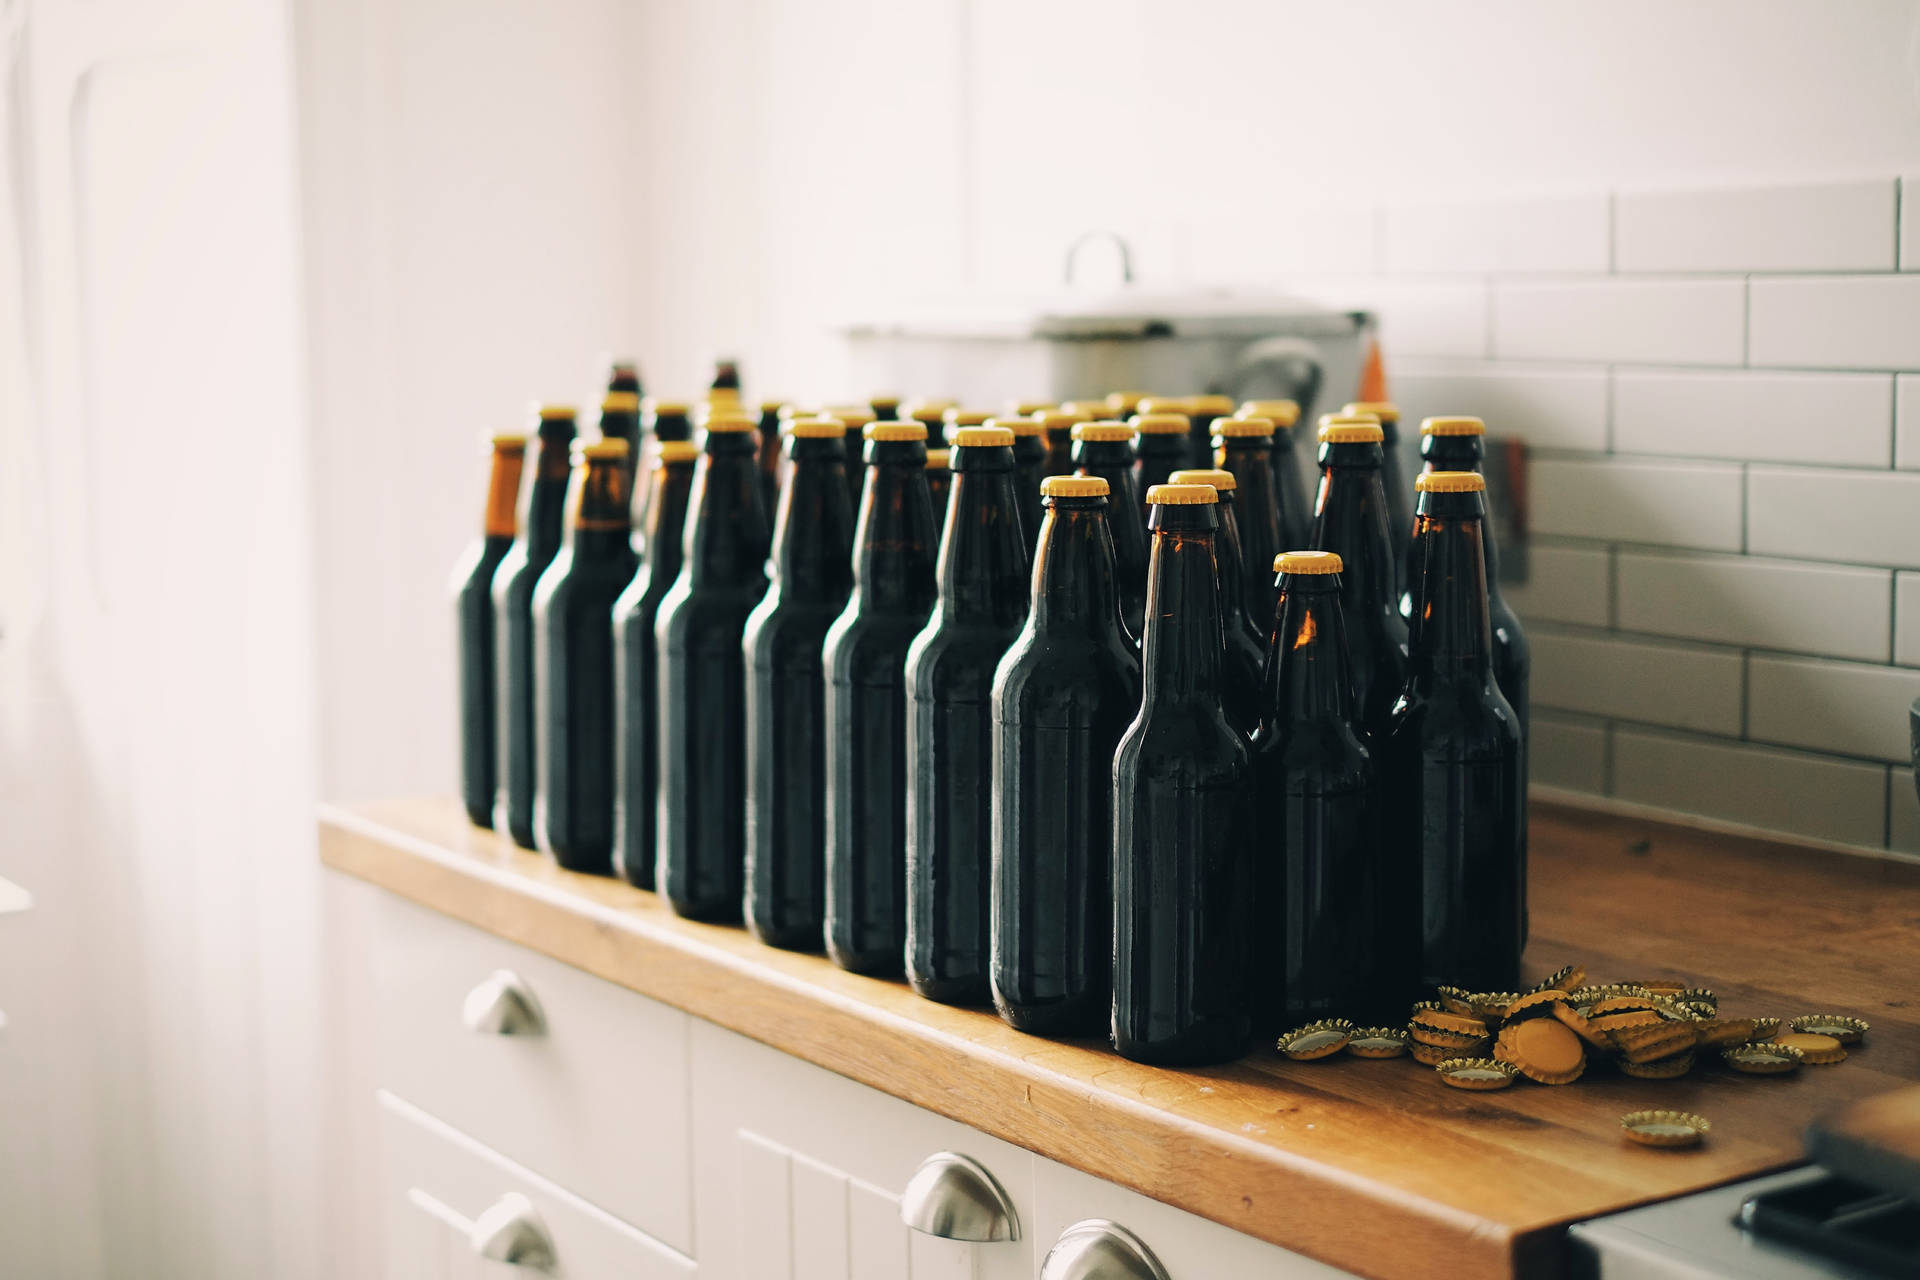 Caption: Chilled Beer Bottles with Yellow Crowns Wallpaper